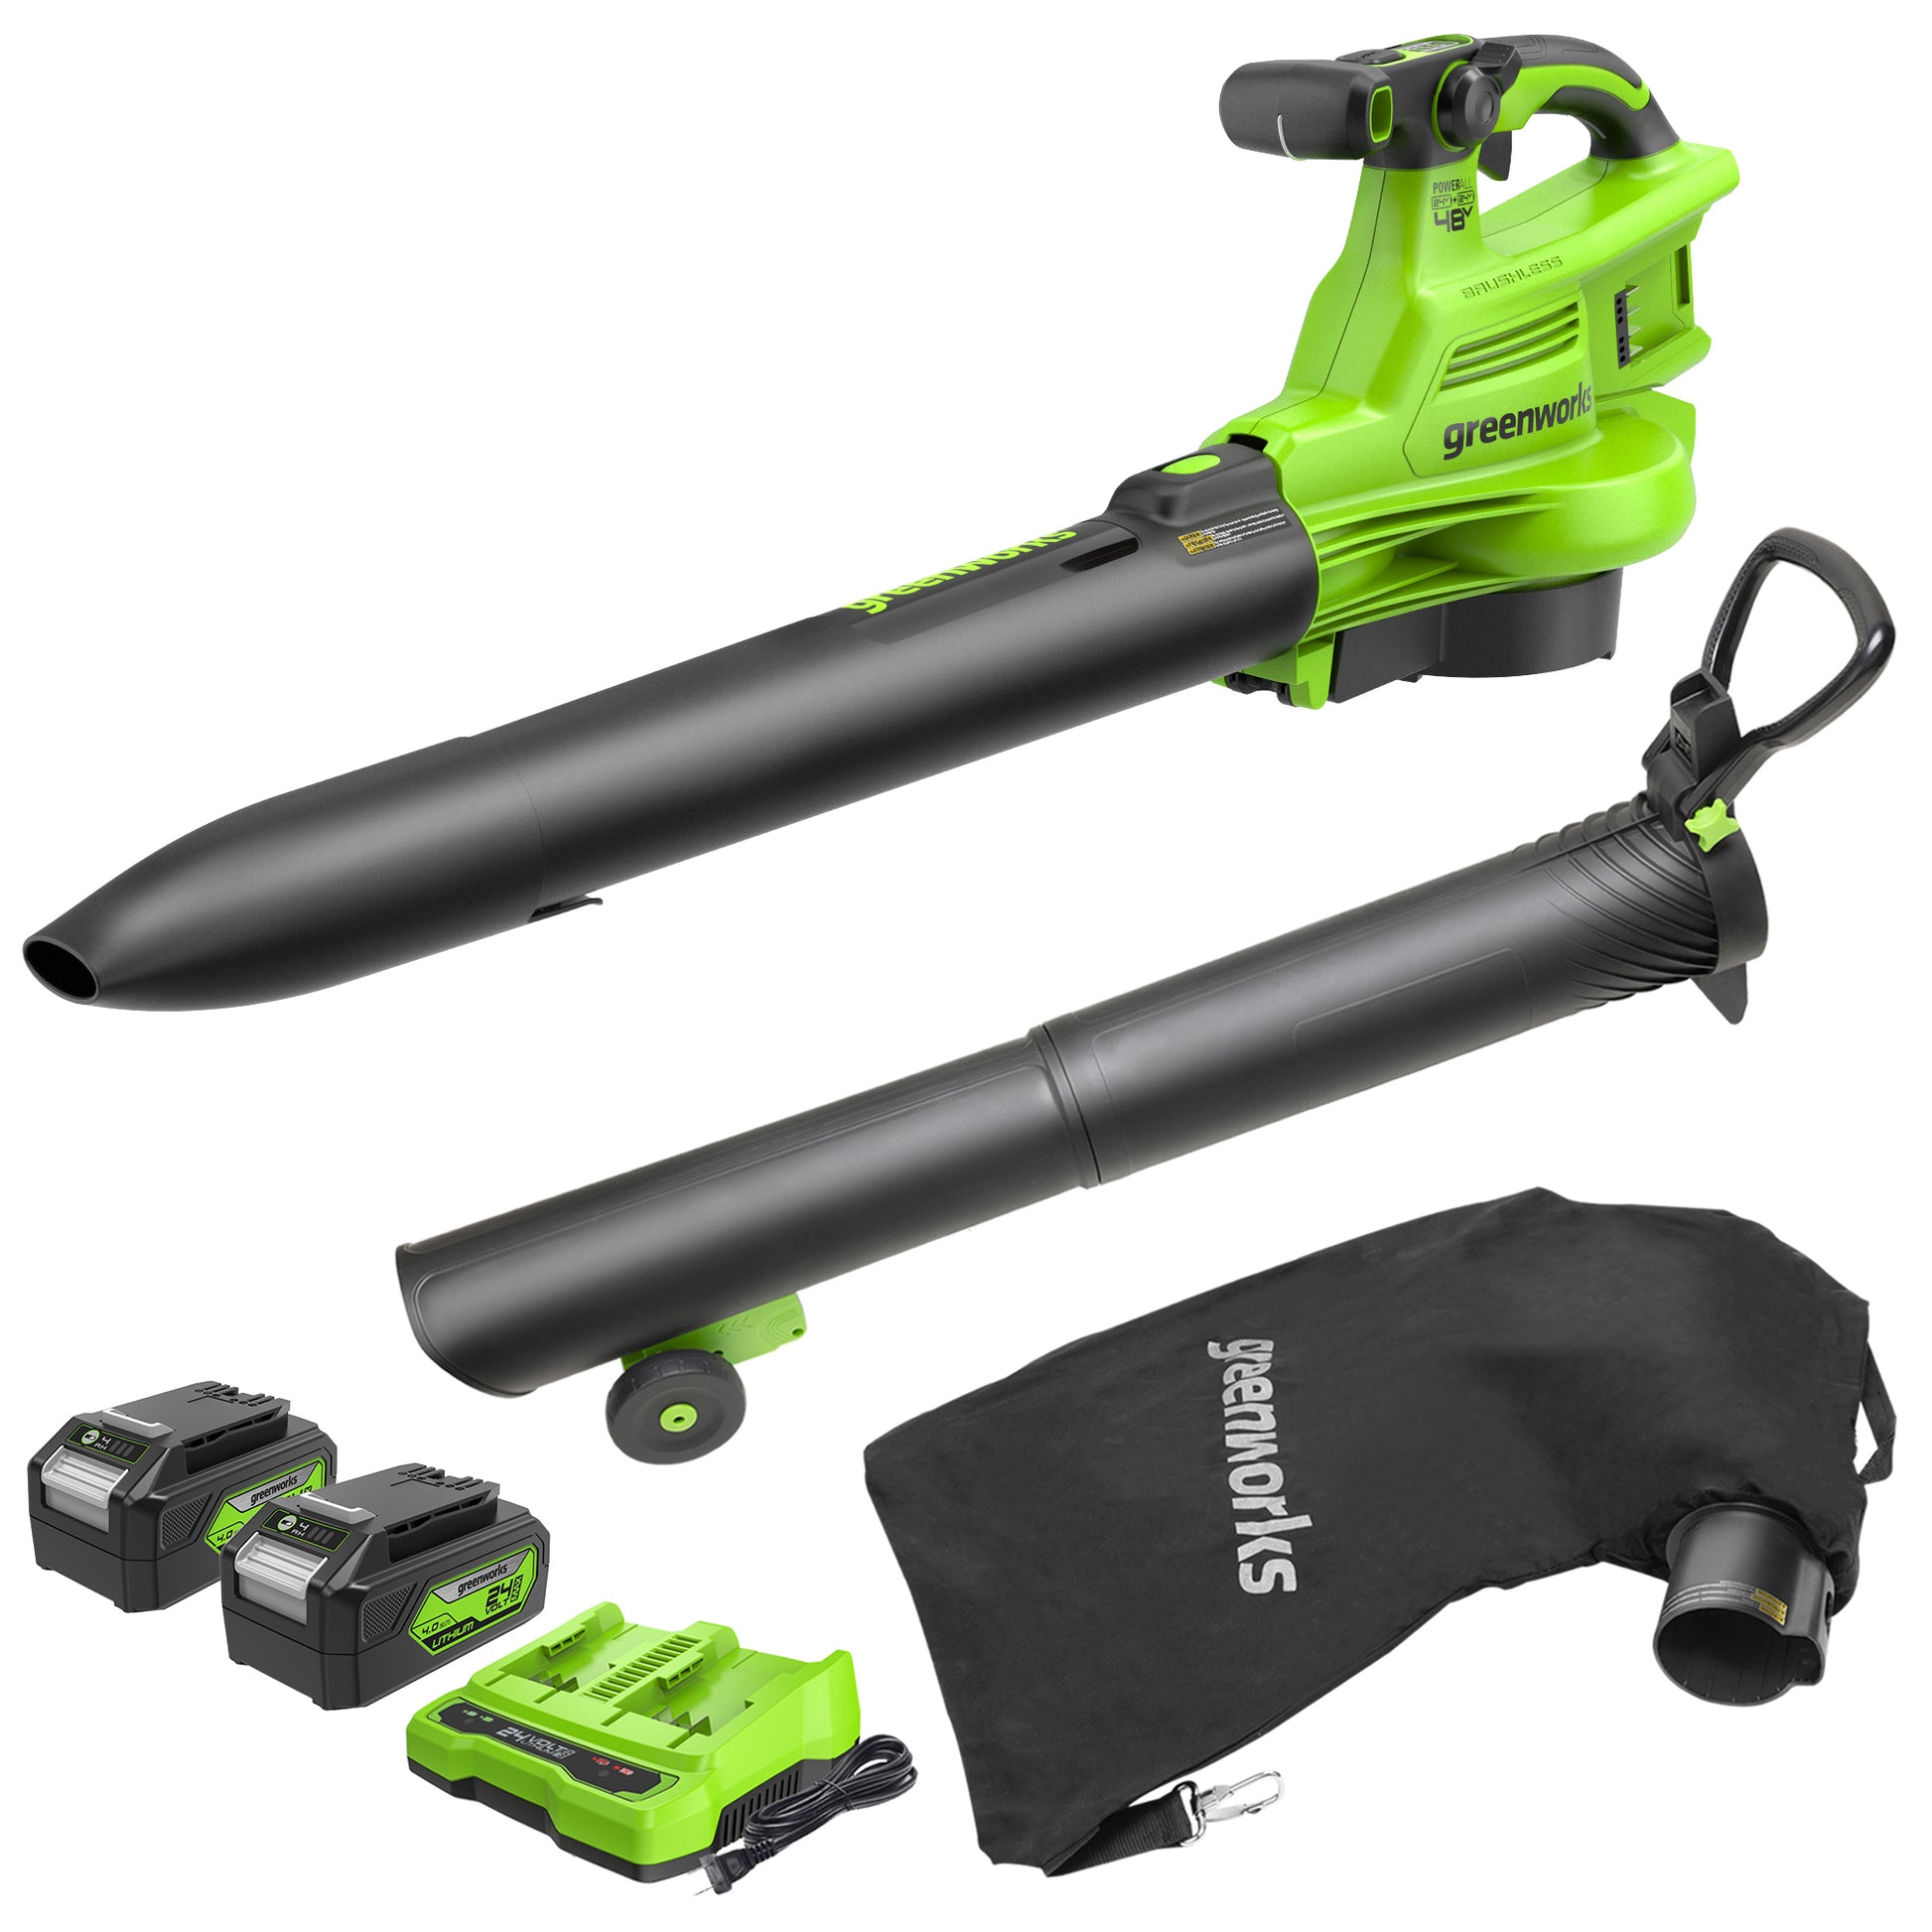  Greenworks UNIVERSAL GUTTER CLEANING KIT : Tools